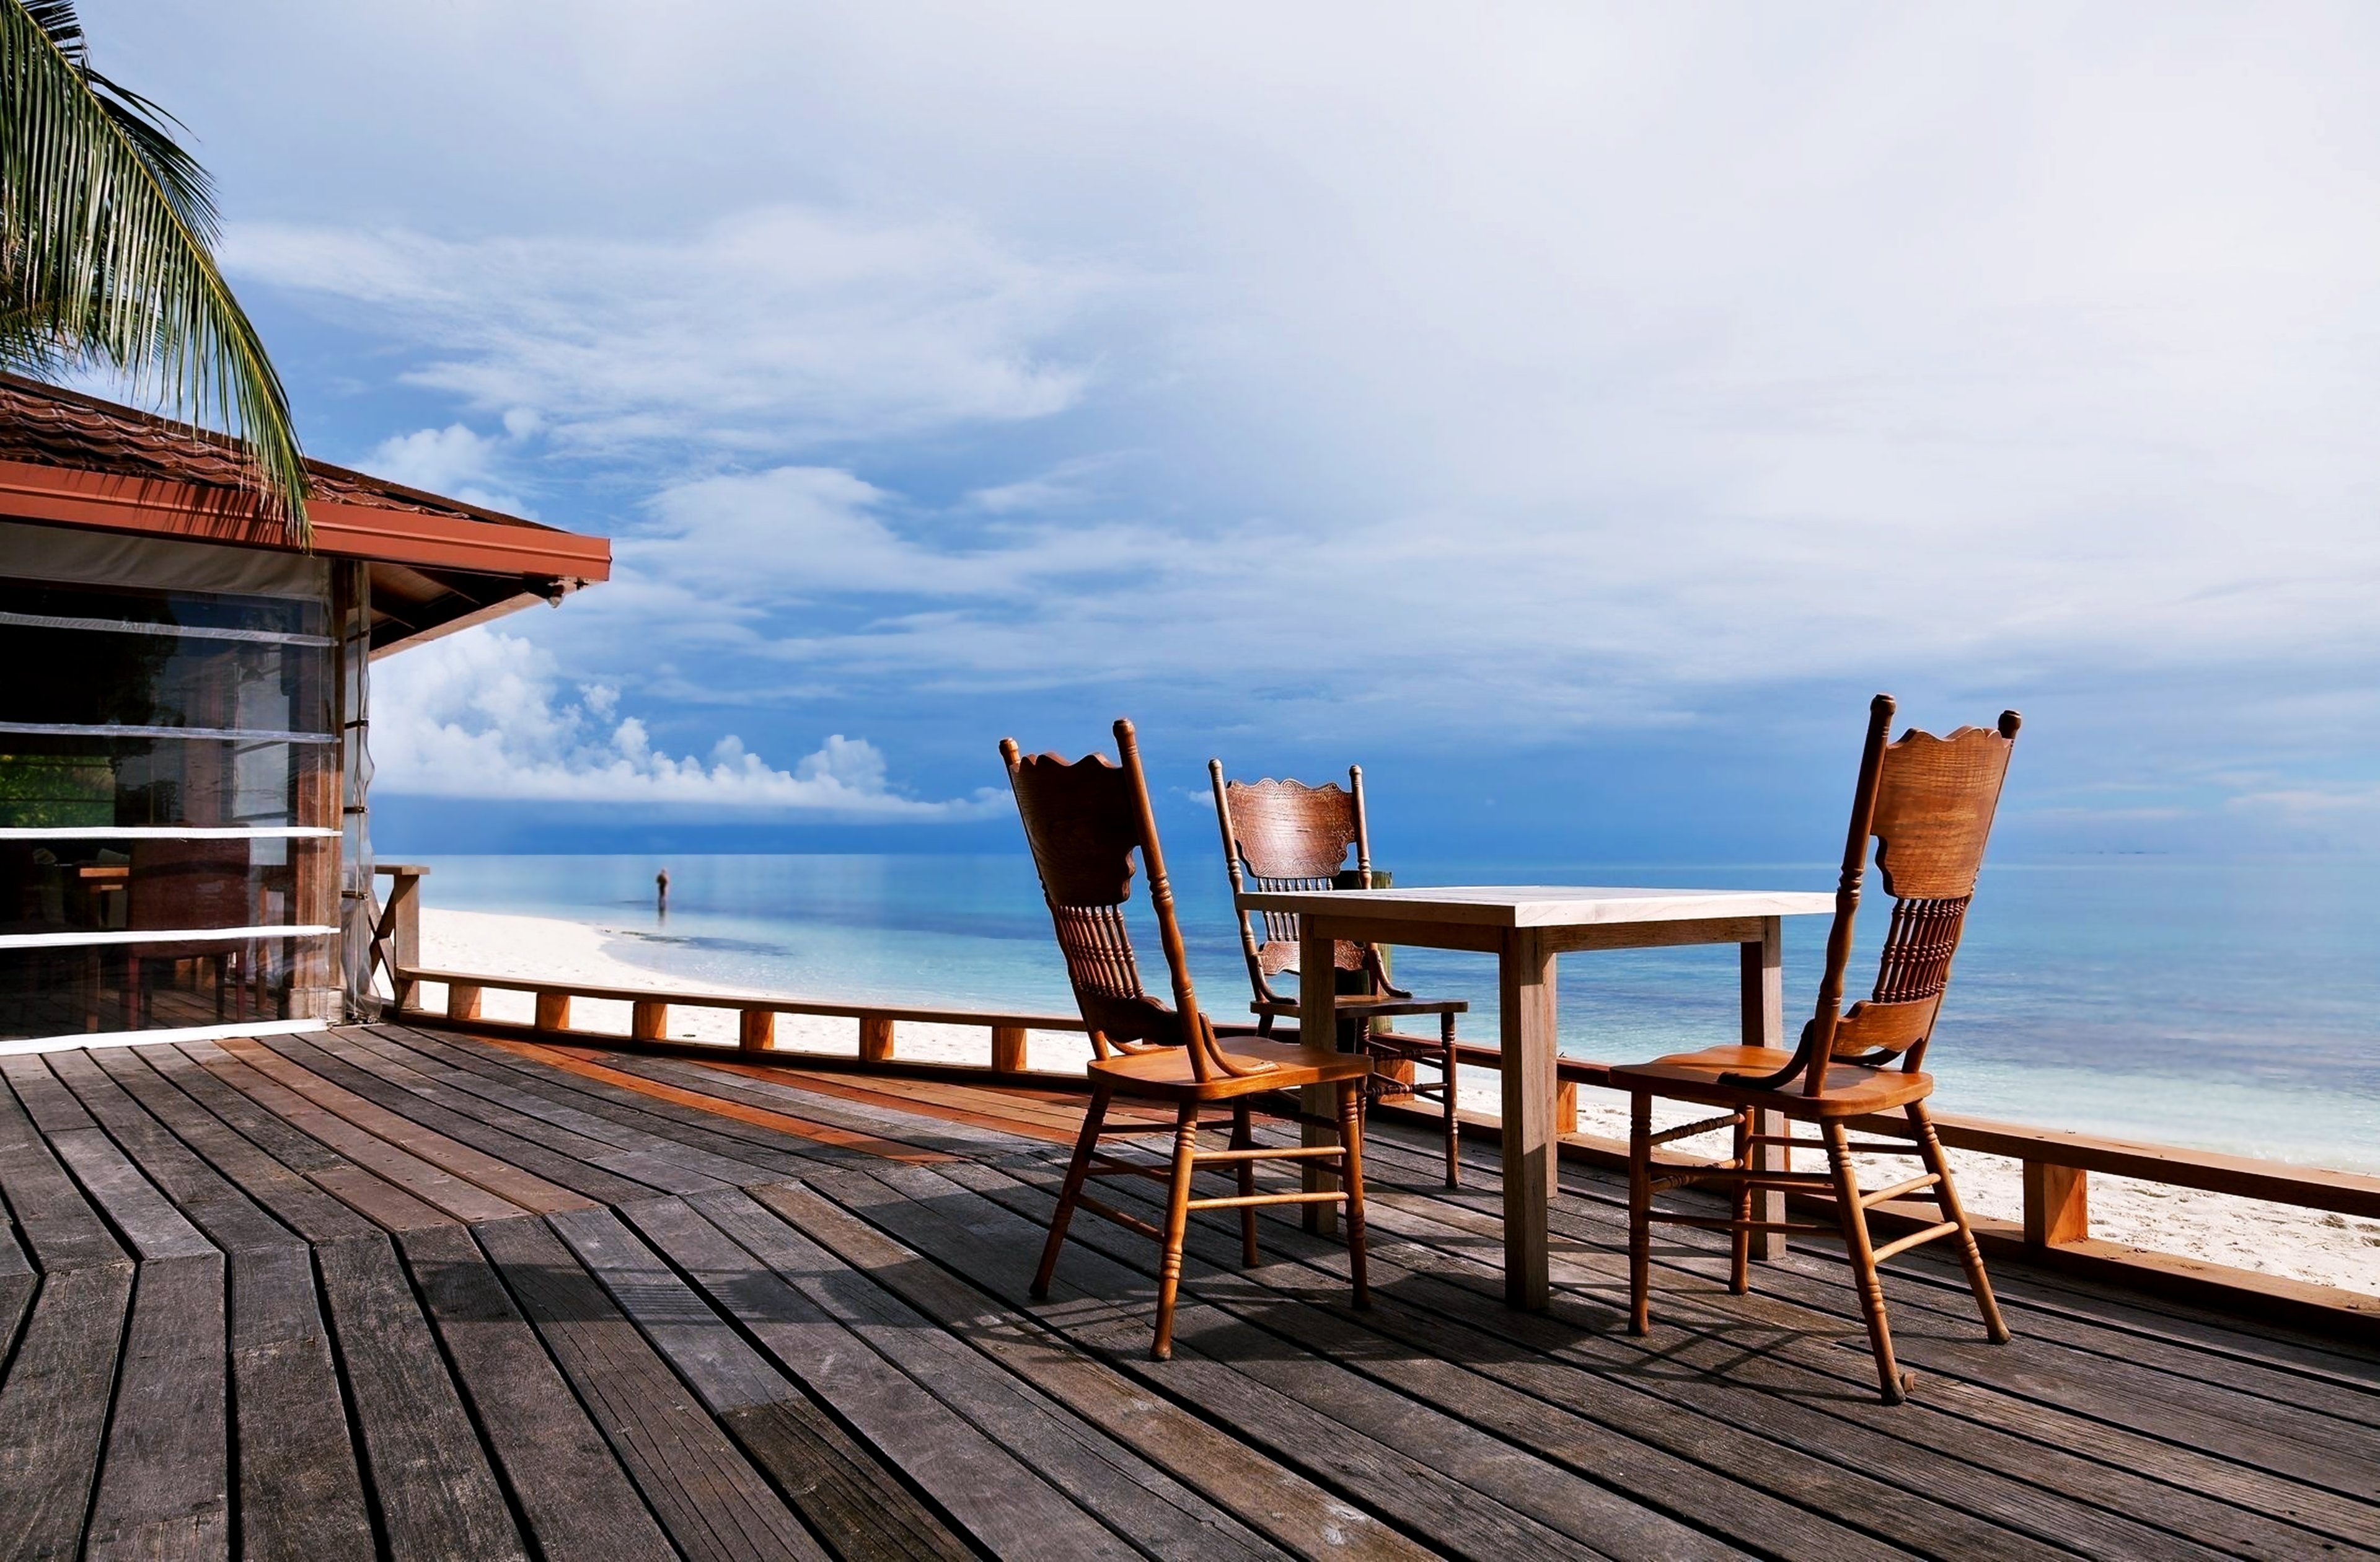 beaches, Sea, Clouds, Holiday, Summer, Calm, Quiet, House, Resort, Luxury, Wood, Table, Chairs, Nature, Landscapes, Earth, Happy, Fun Wallpaper